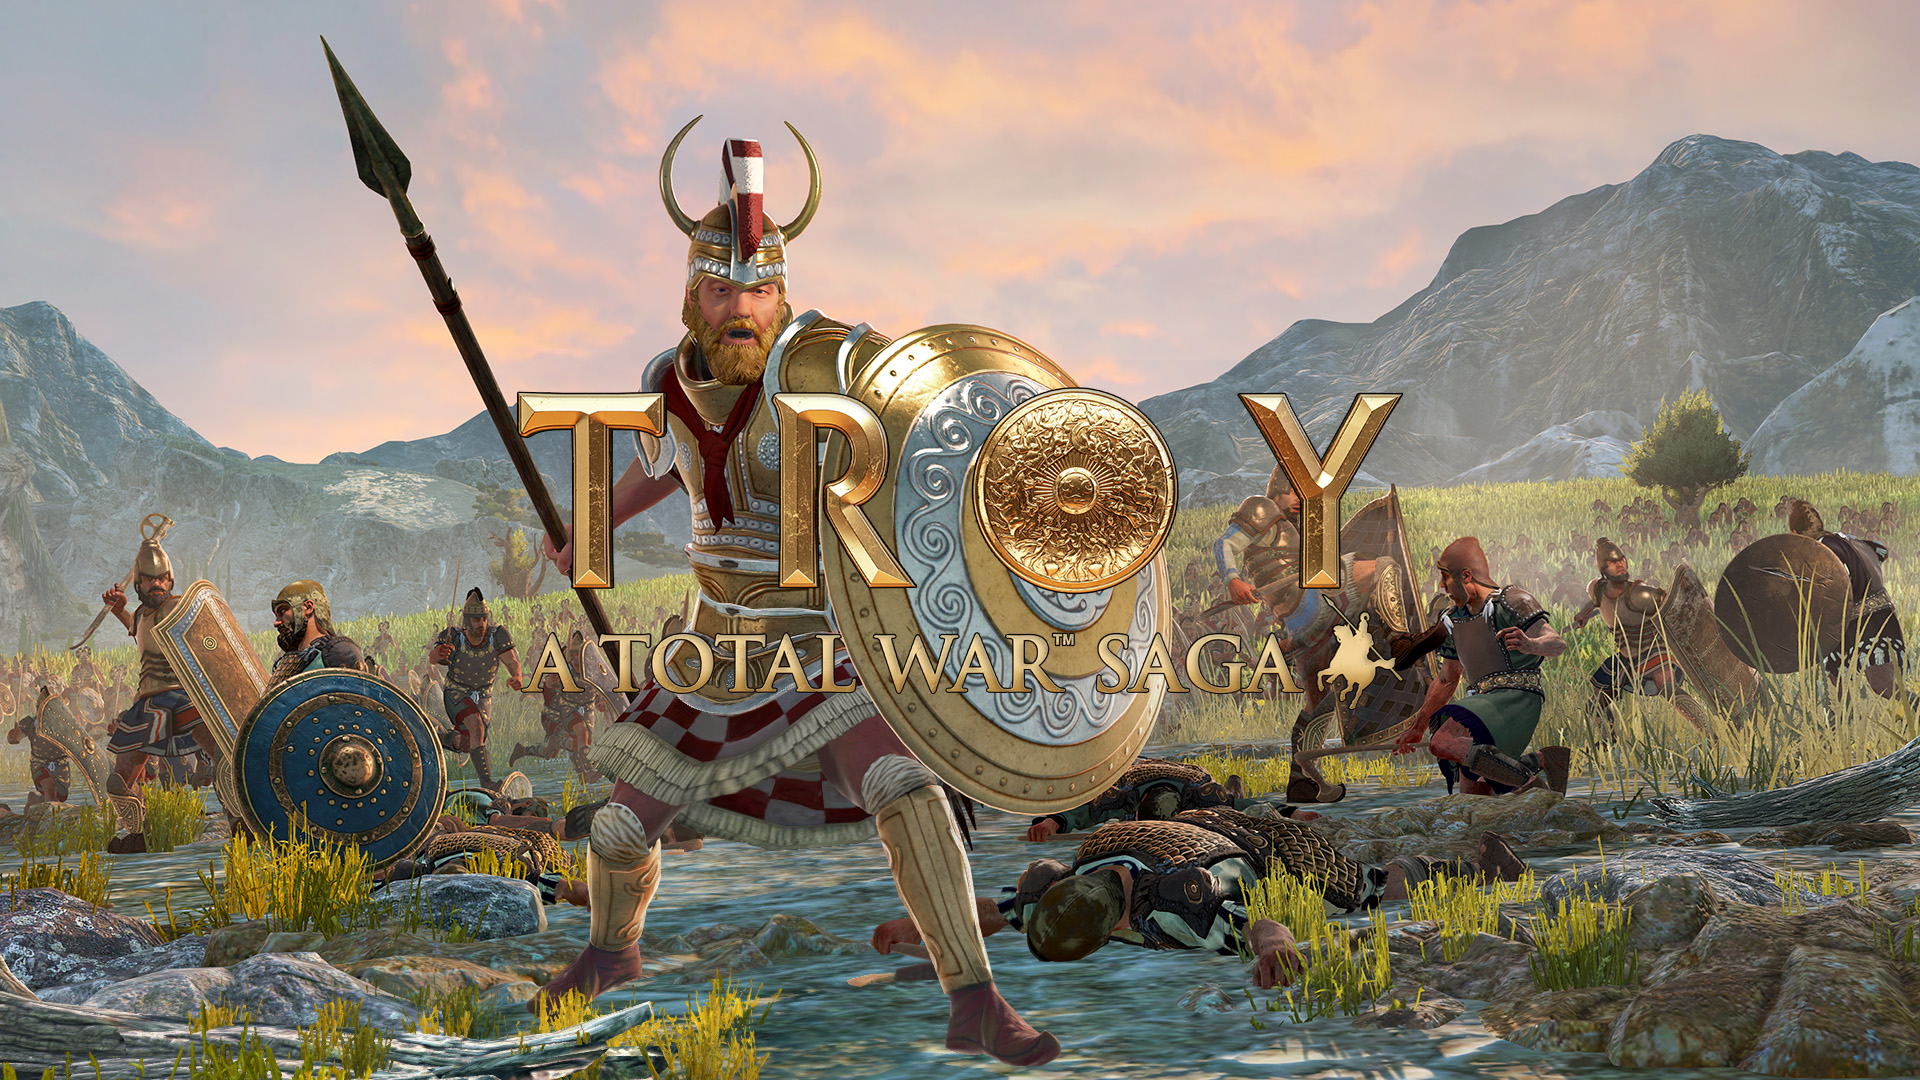 HD desktop wallpaper featuring 'A Total War Saga: TROY' with warriors in battle for game background.